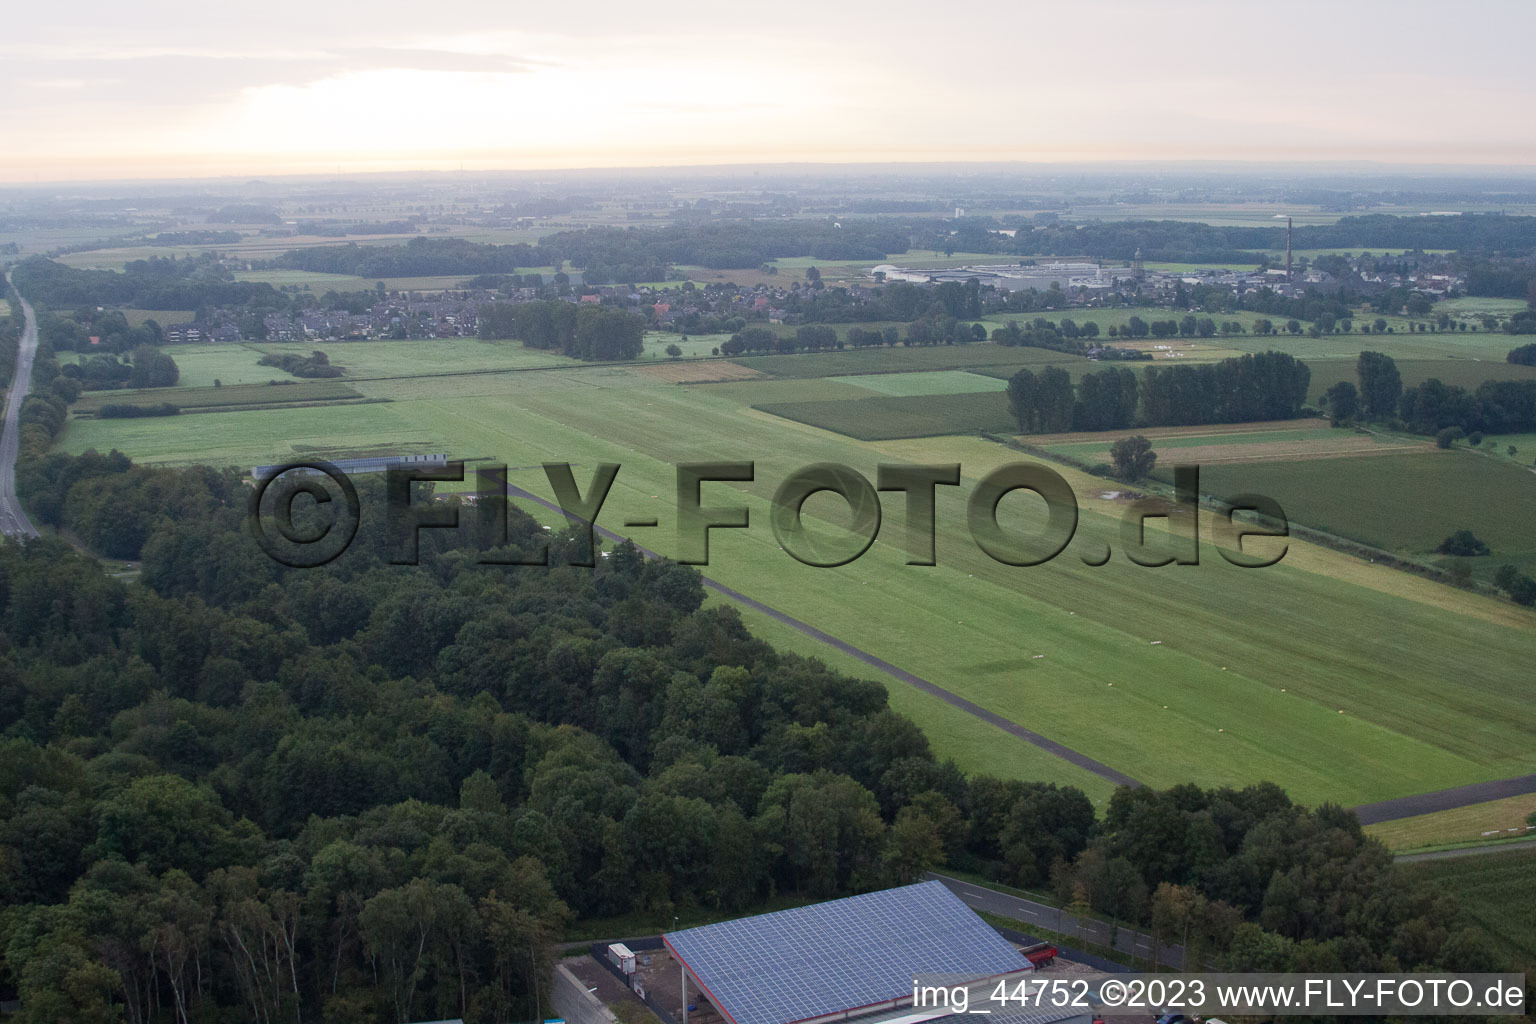 Grefrath in the state North Rhine-Westphalia, Germany seen from above